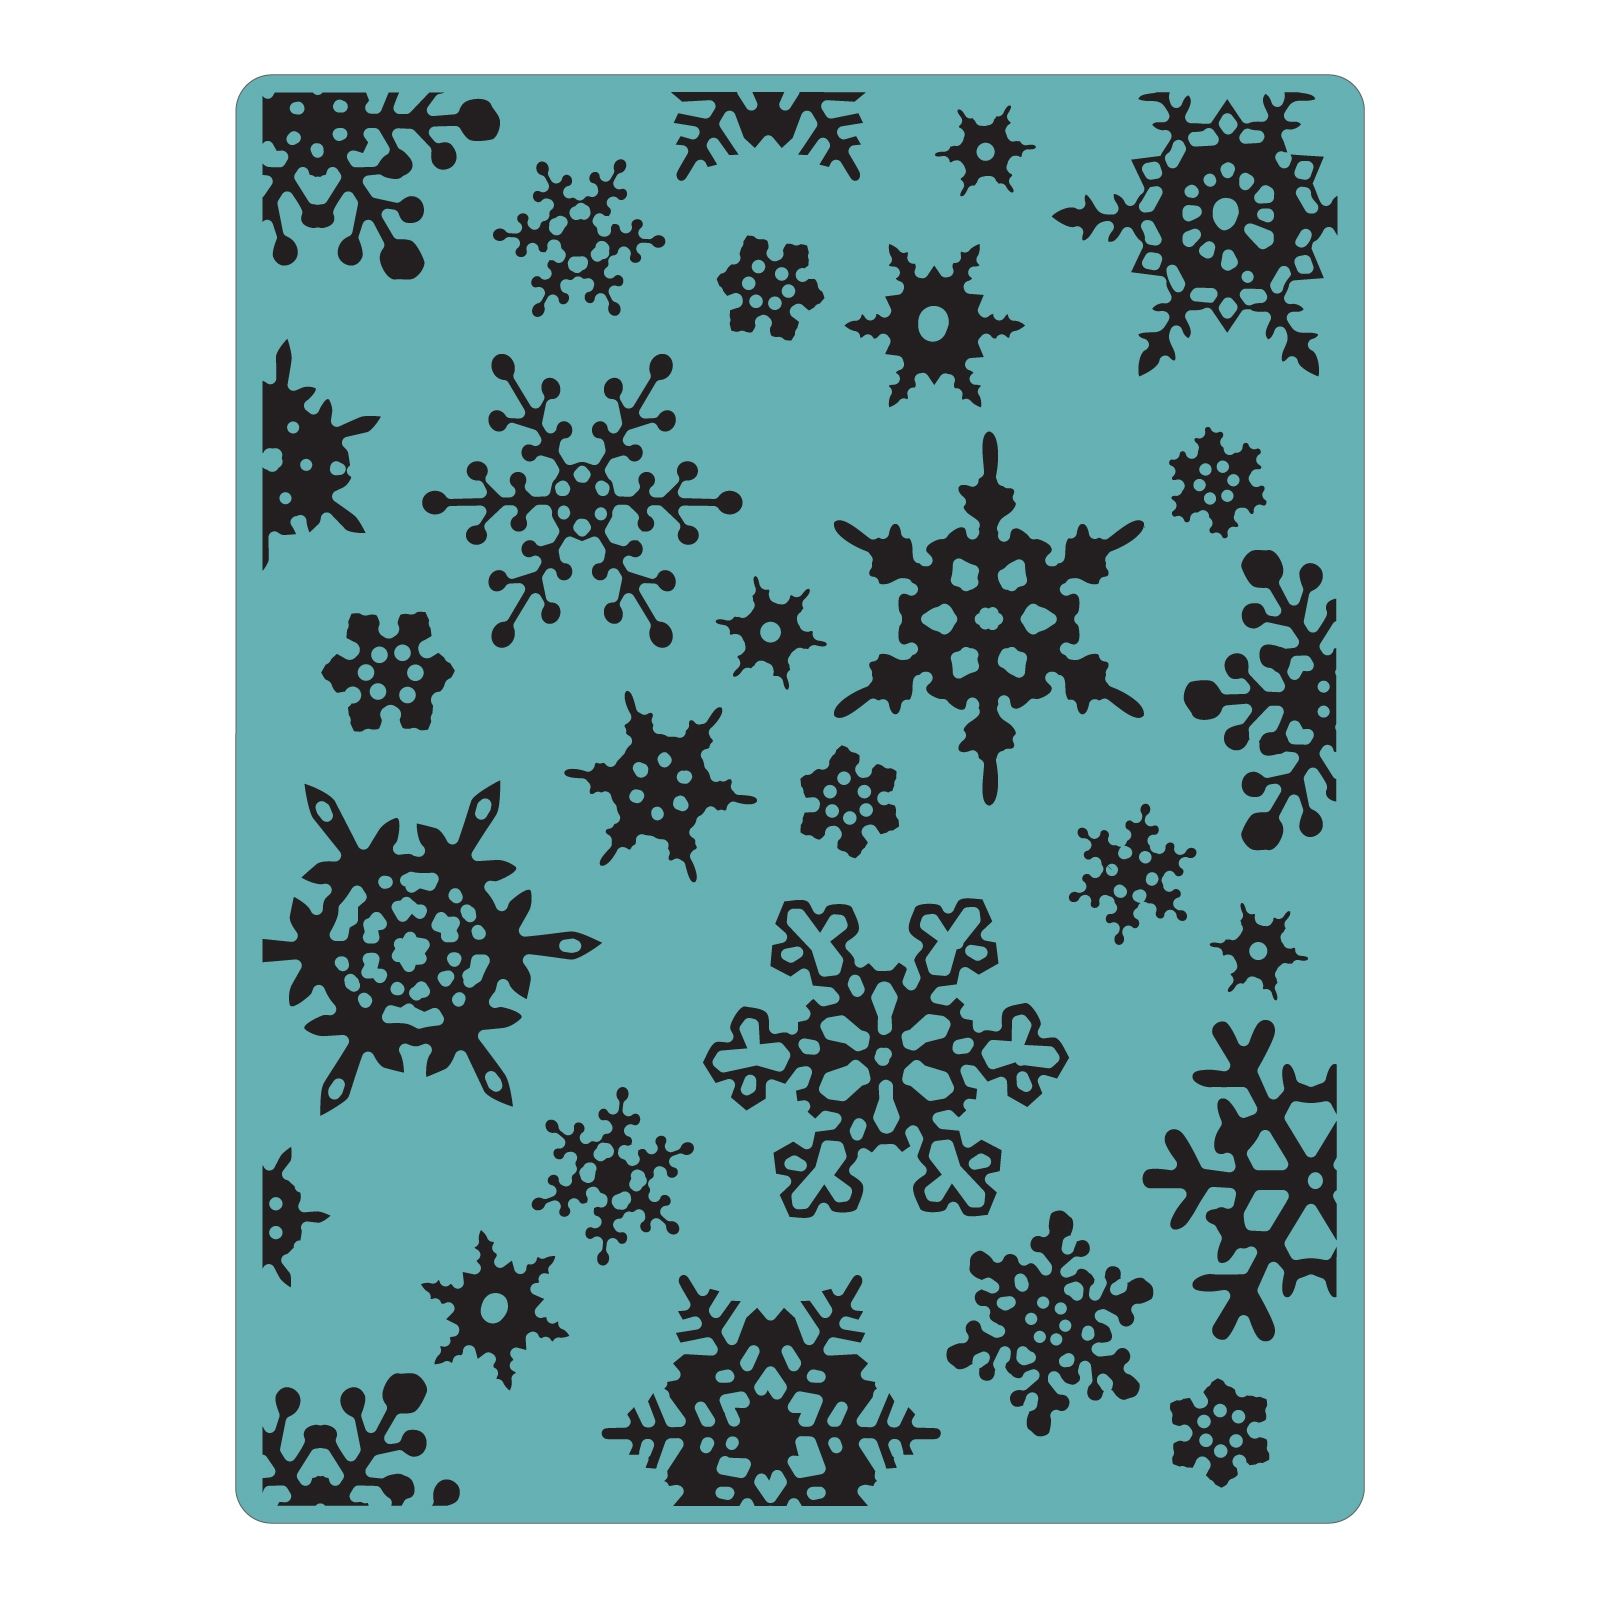 Sizzix Texture Fades A2 Embossing Folder By Tim Holtz - Simple Snowflakes